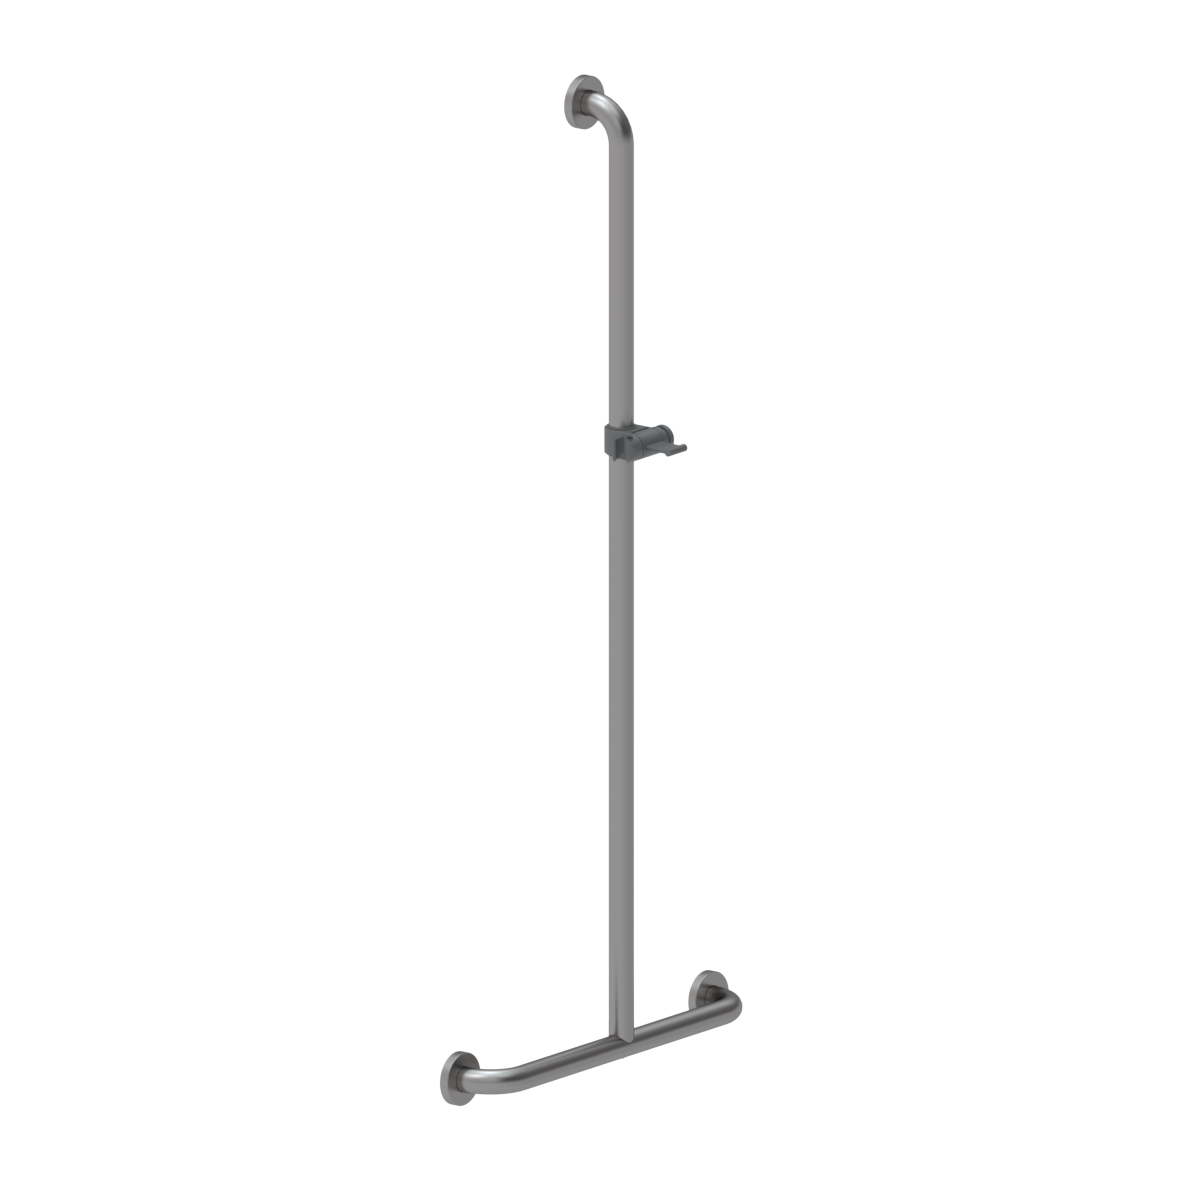 Inox Care Shower handrail, with shower head rail, left and right, 500 x 1200 mm, Stainless steel, shower head holder, colour dark grey (018)